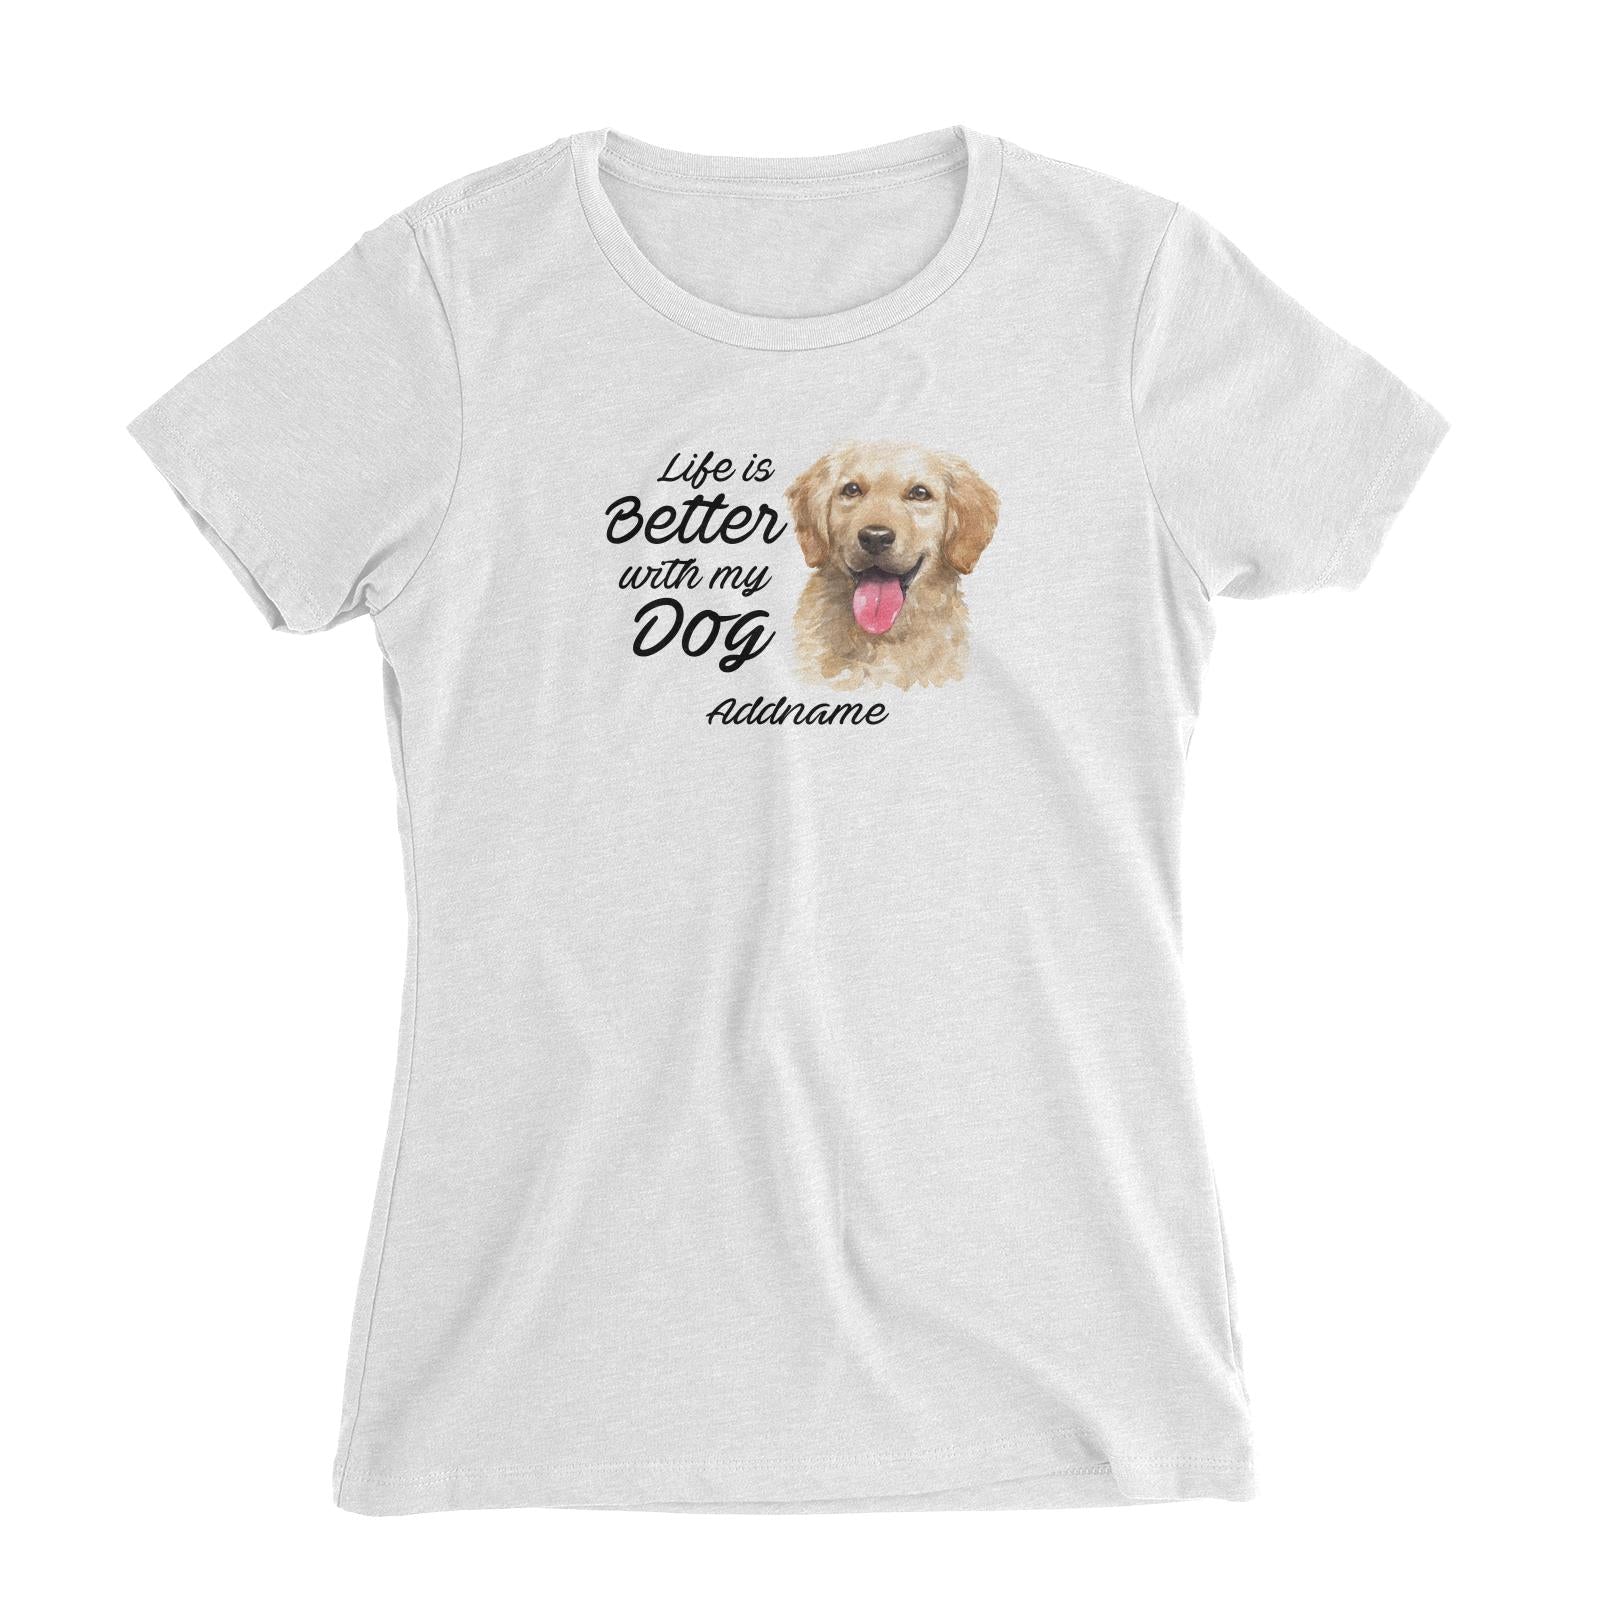 Watercolor Life is Better With My Dog Golden Retriever Front Addname Women's Slim Fit T-Shirt